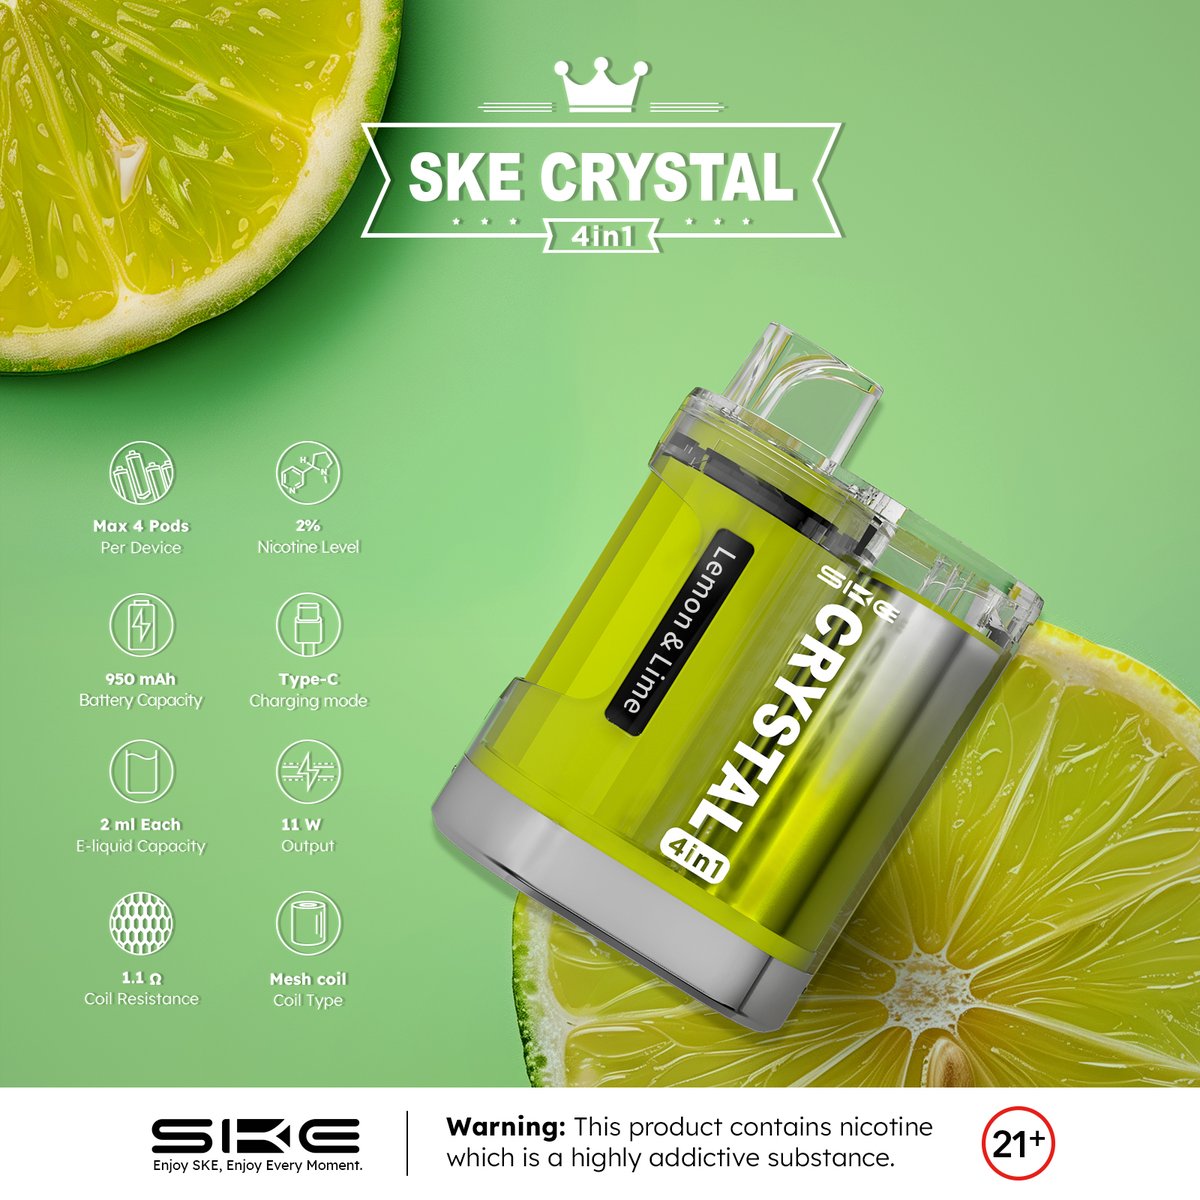 🍋 🍈 Tantalize your taste buds with Lemon & Lime ! 💨 

Warning: This product contains nicotine which is a highly addictive substance. You must be 21+
#skevape #ske #vapelove #vapefam #vapefamilyuk #vapefams #vapedaily #skecrystal #skecrystal4in1